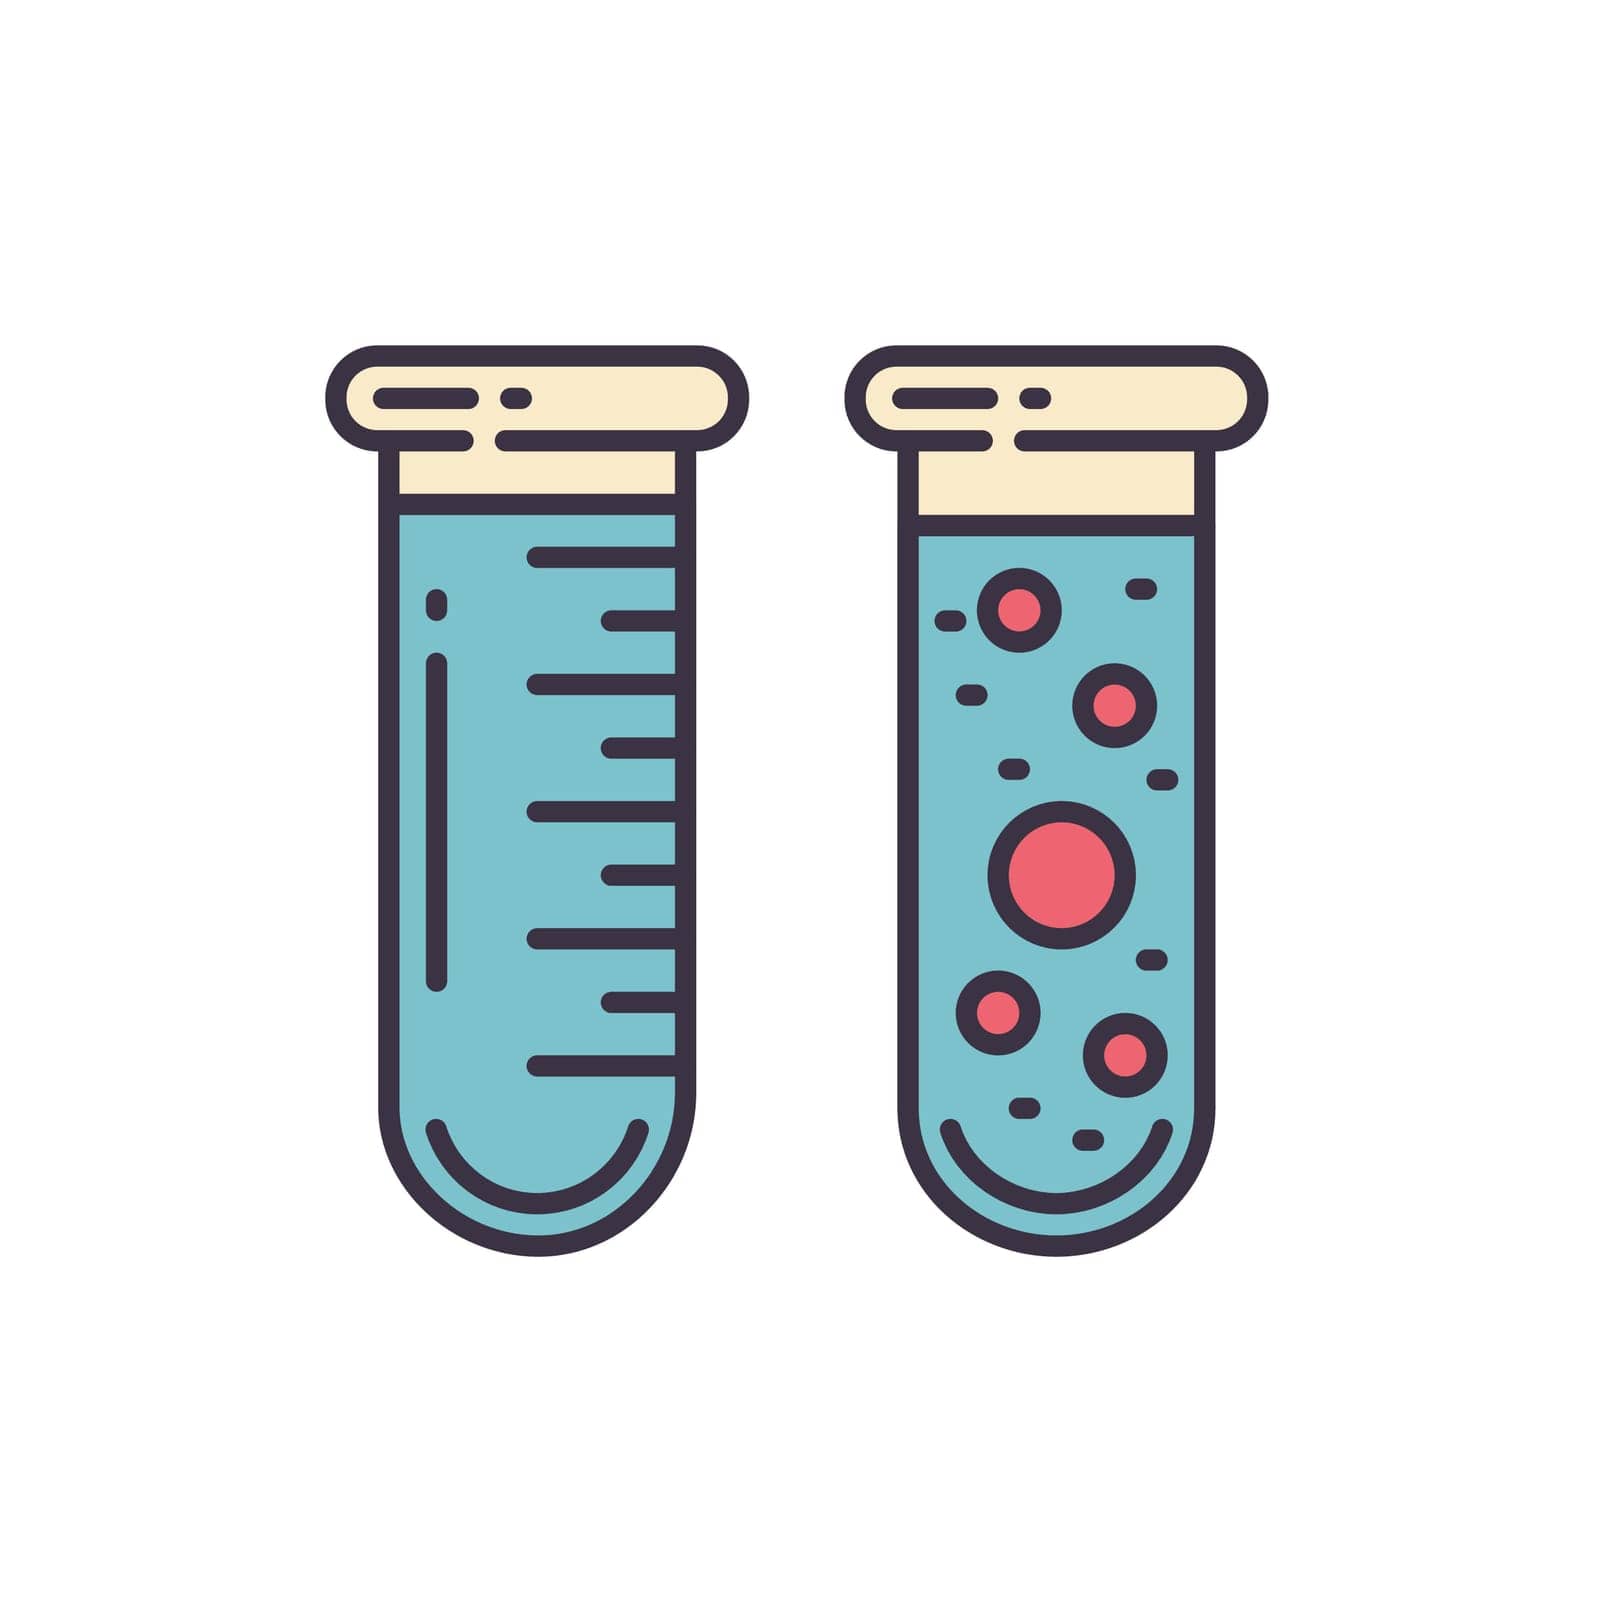 Test Tube related vector icon. by smoki